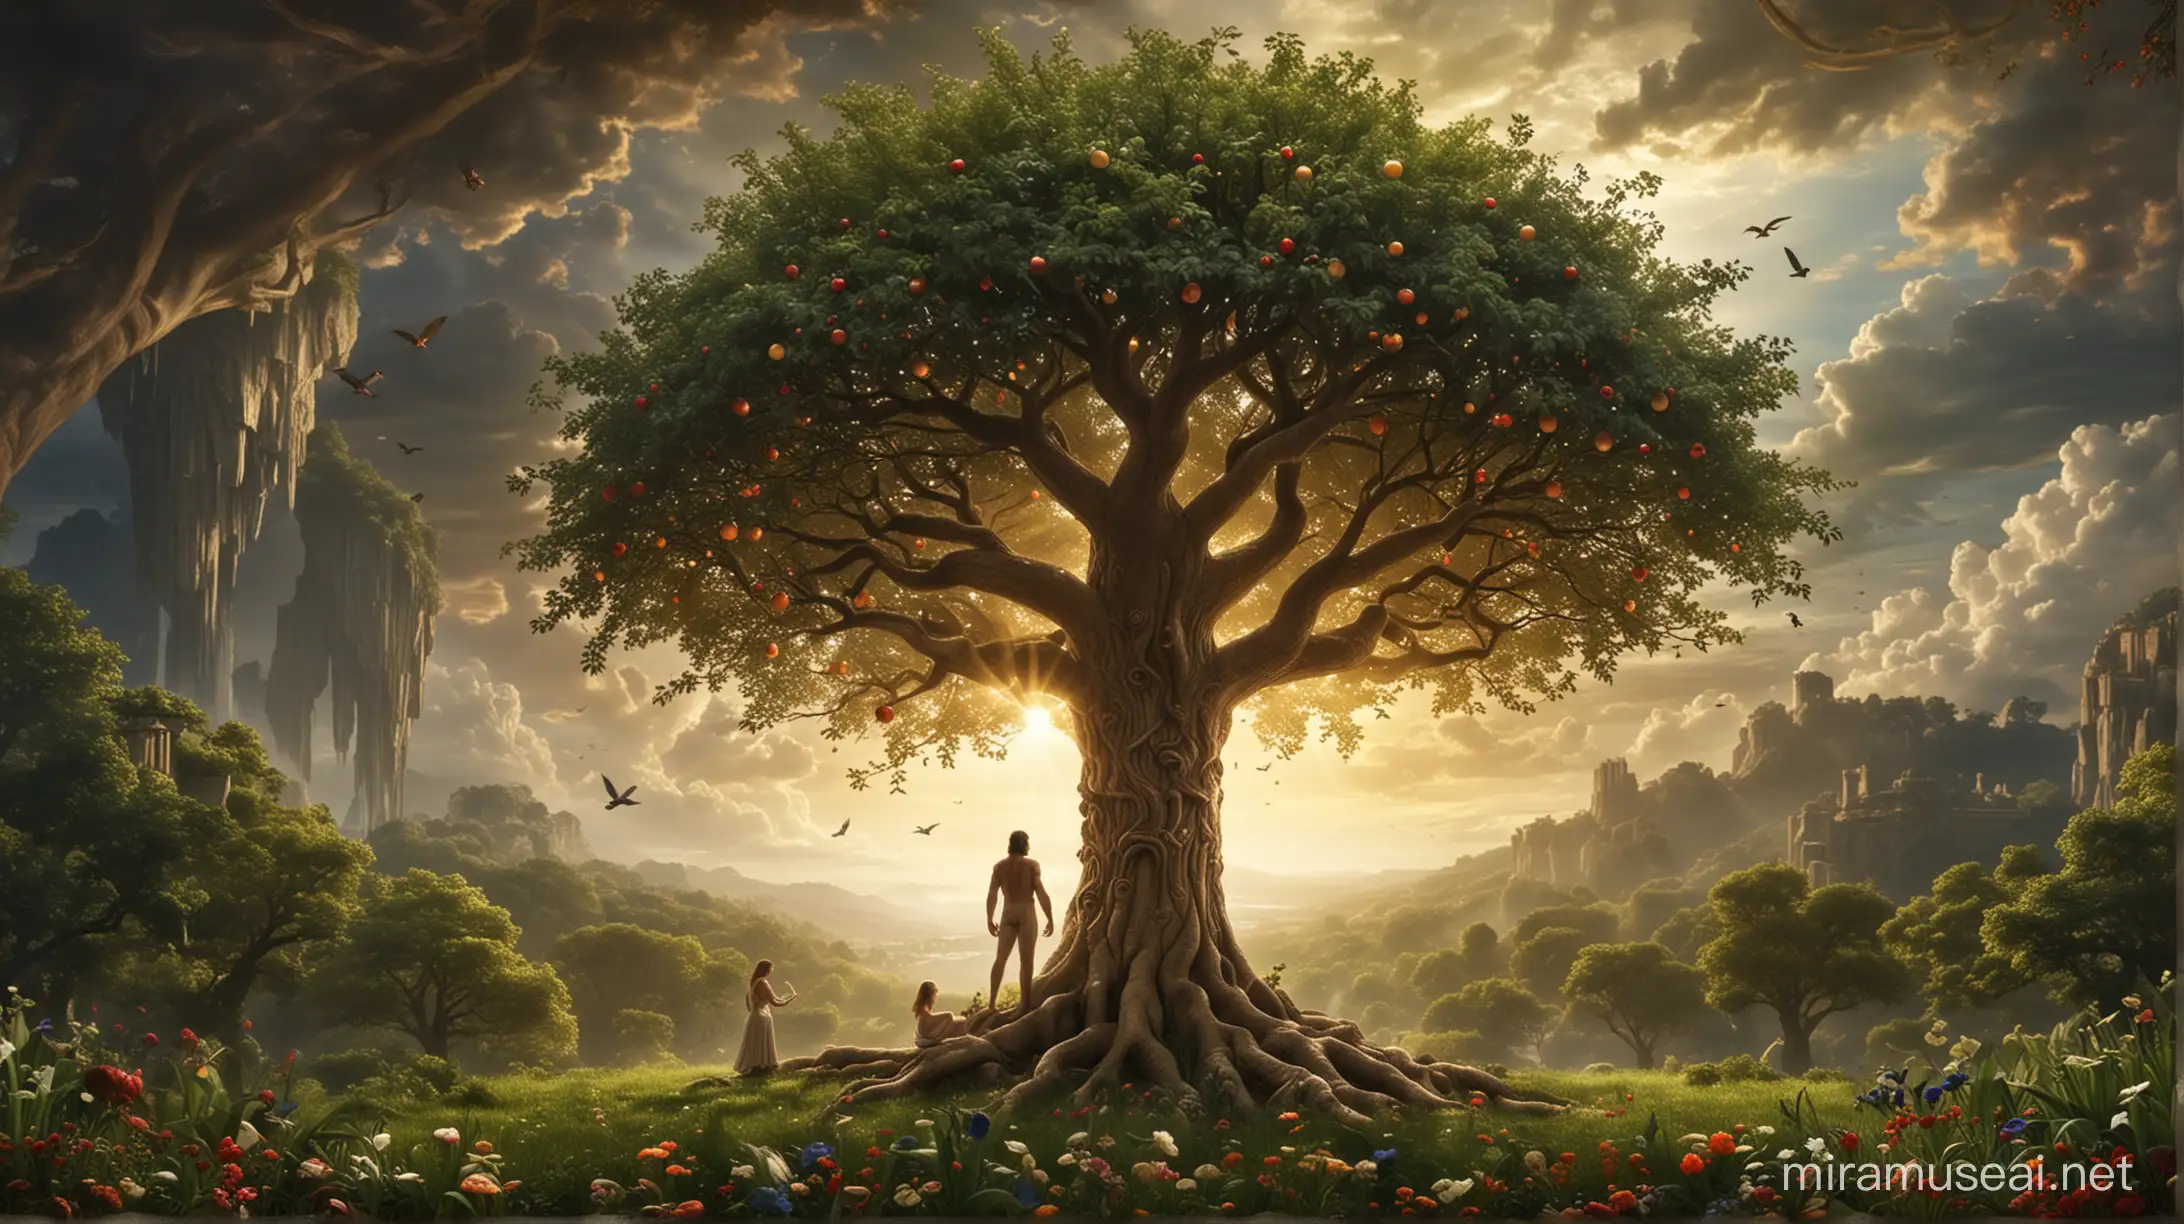 1 man and 1 woman in the garden of eden, the Tree of knowledge of good and evil